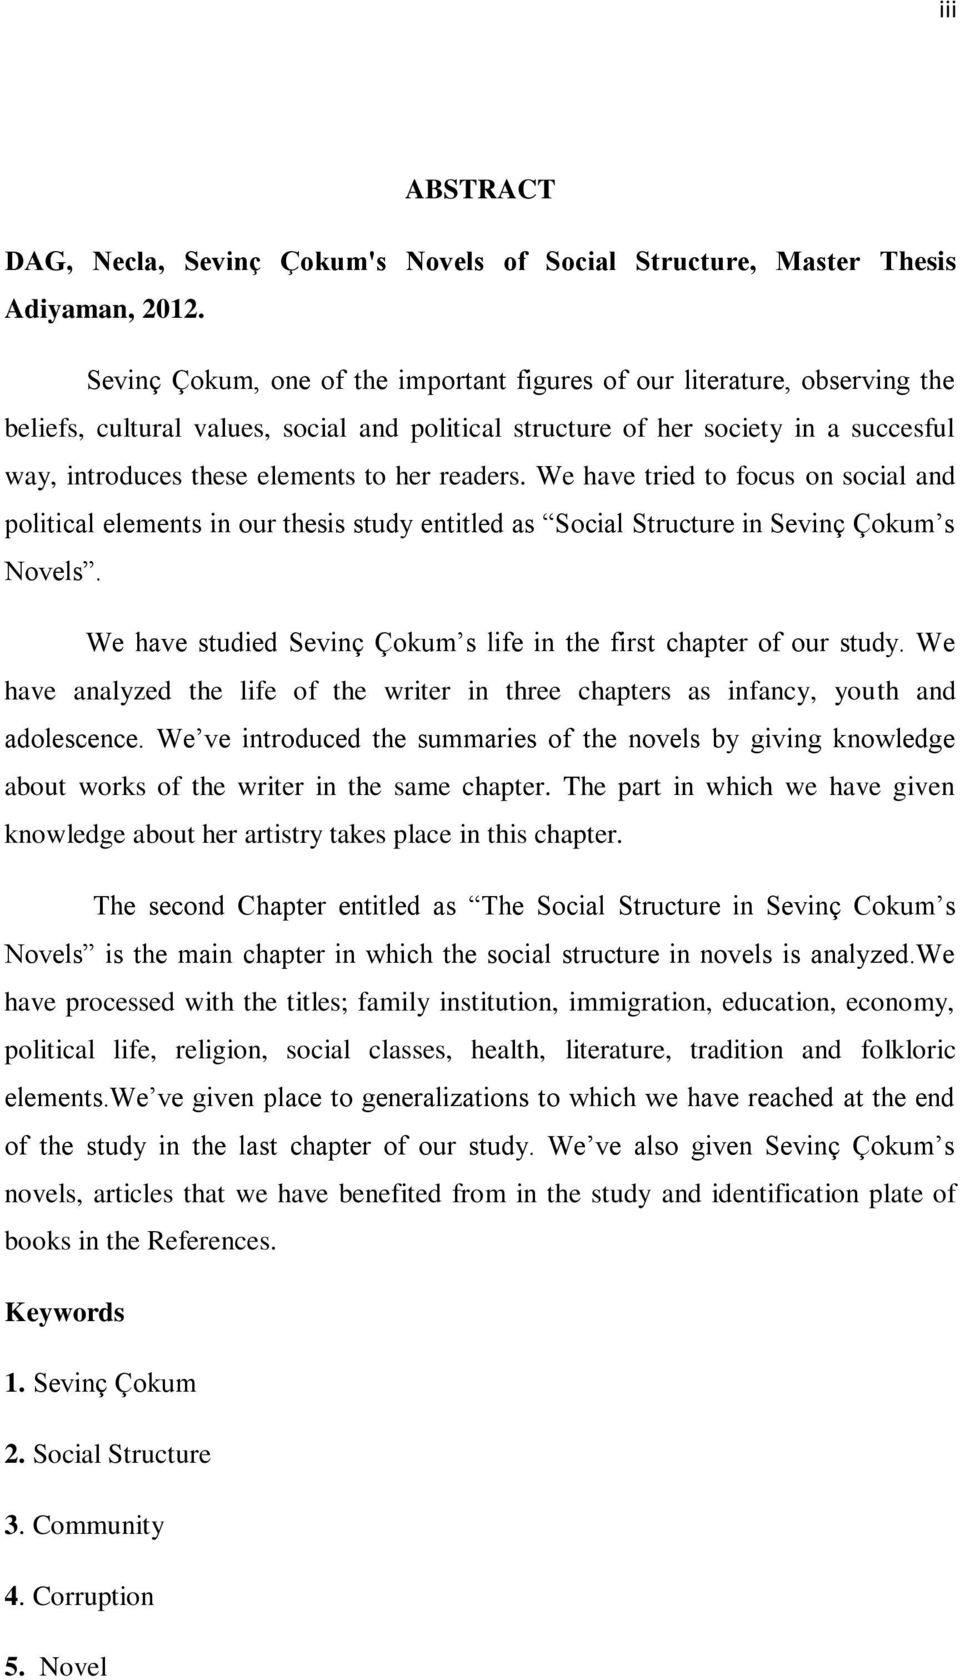 her readers. We have tried to focus on social and political elements in our thesis study entitled as Social Structure in Sevinç Çokum s Novels.